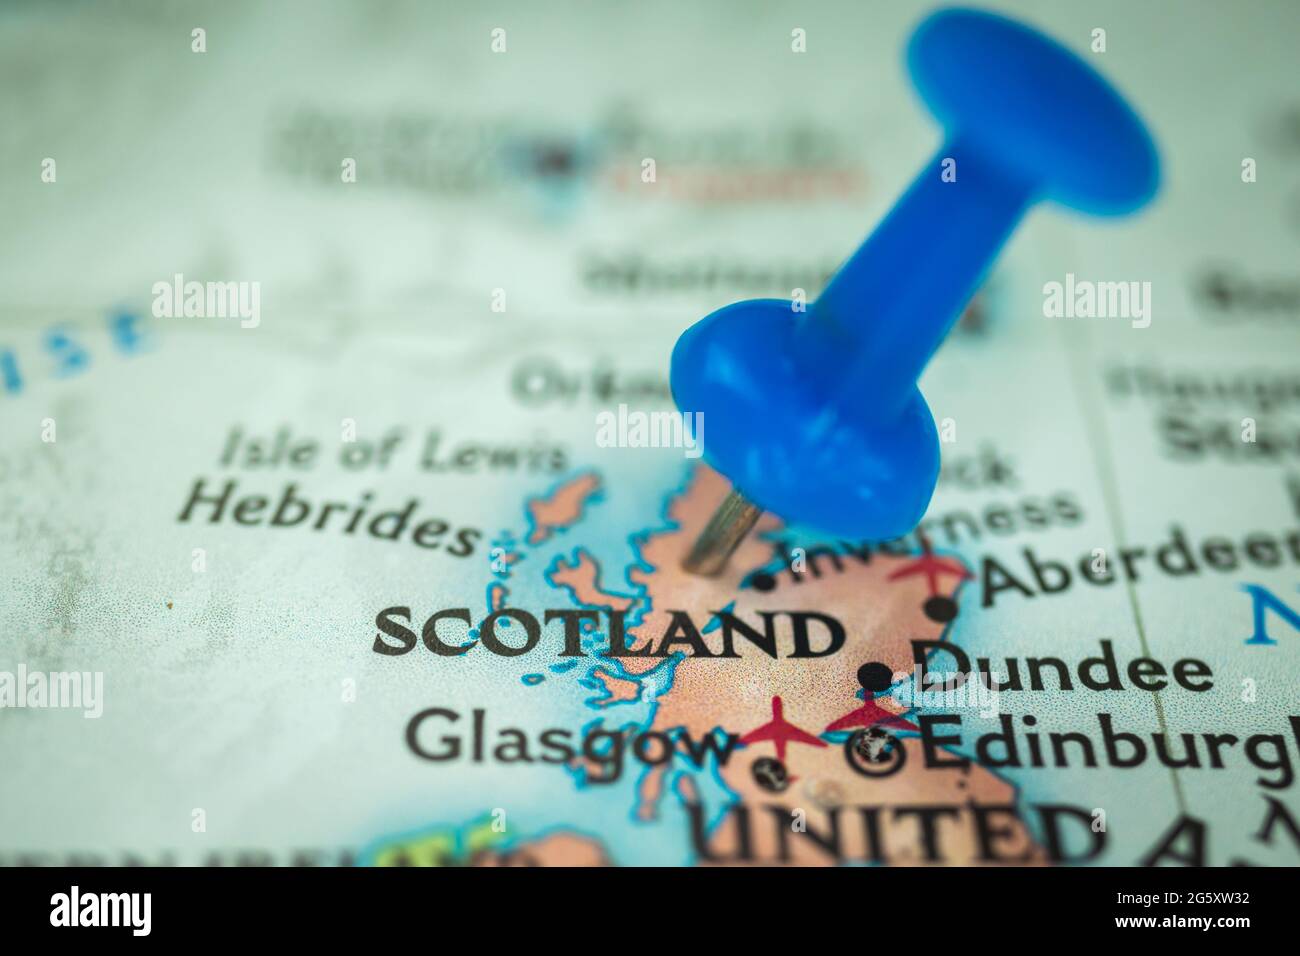 Location Scotland, push pin on map closeup, marker of destination for travel, tourism and trip concept, Europe Stock Photo